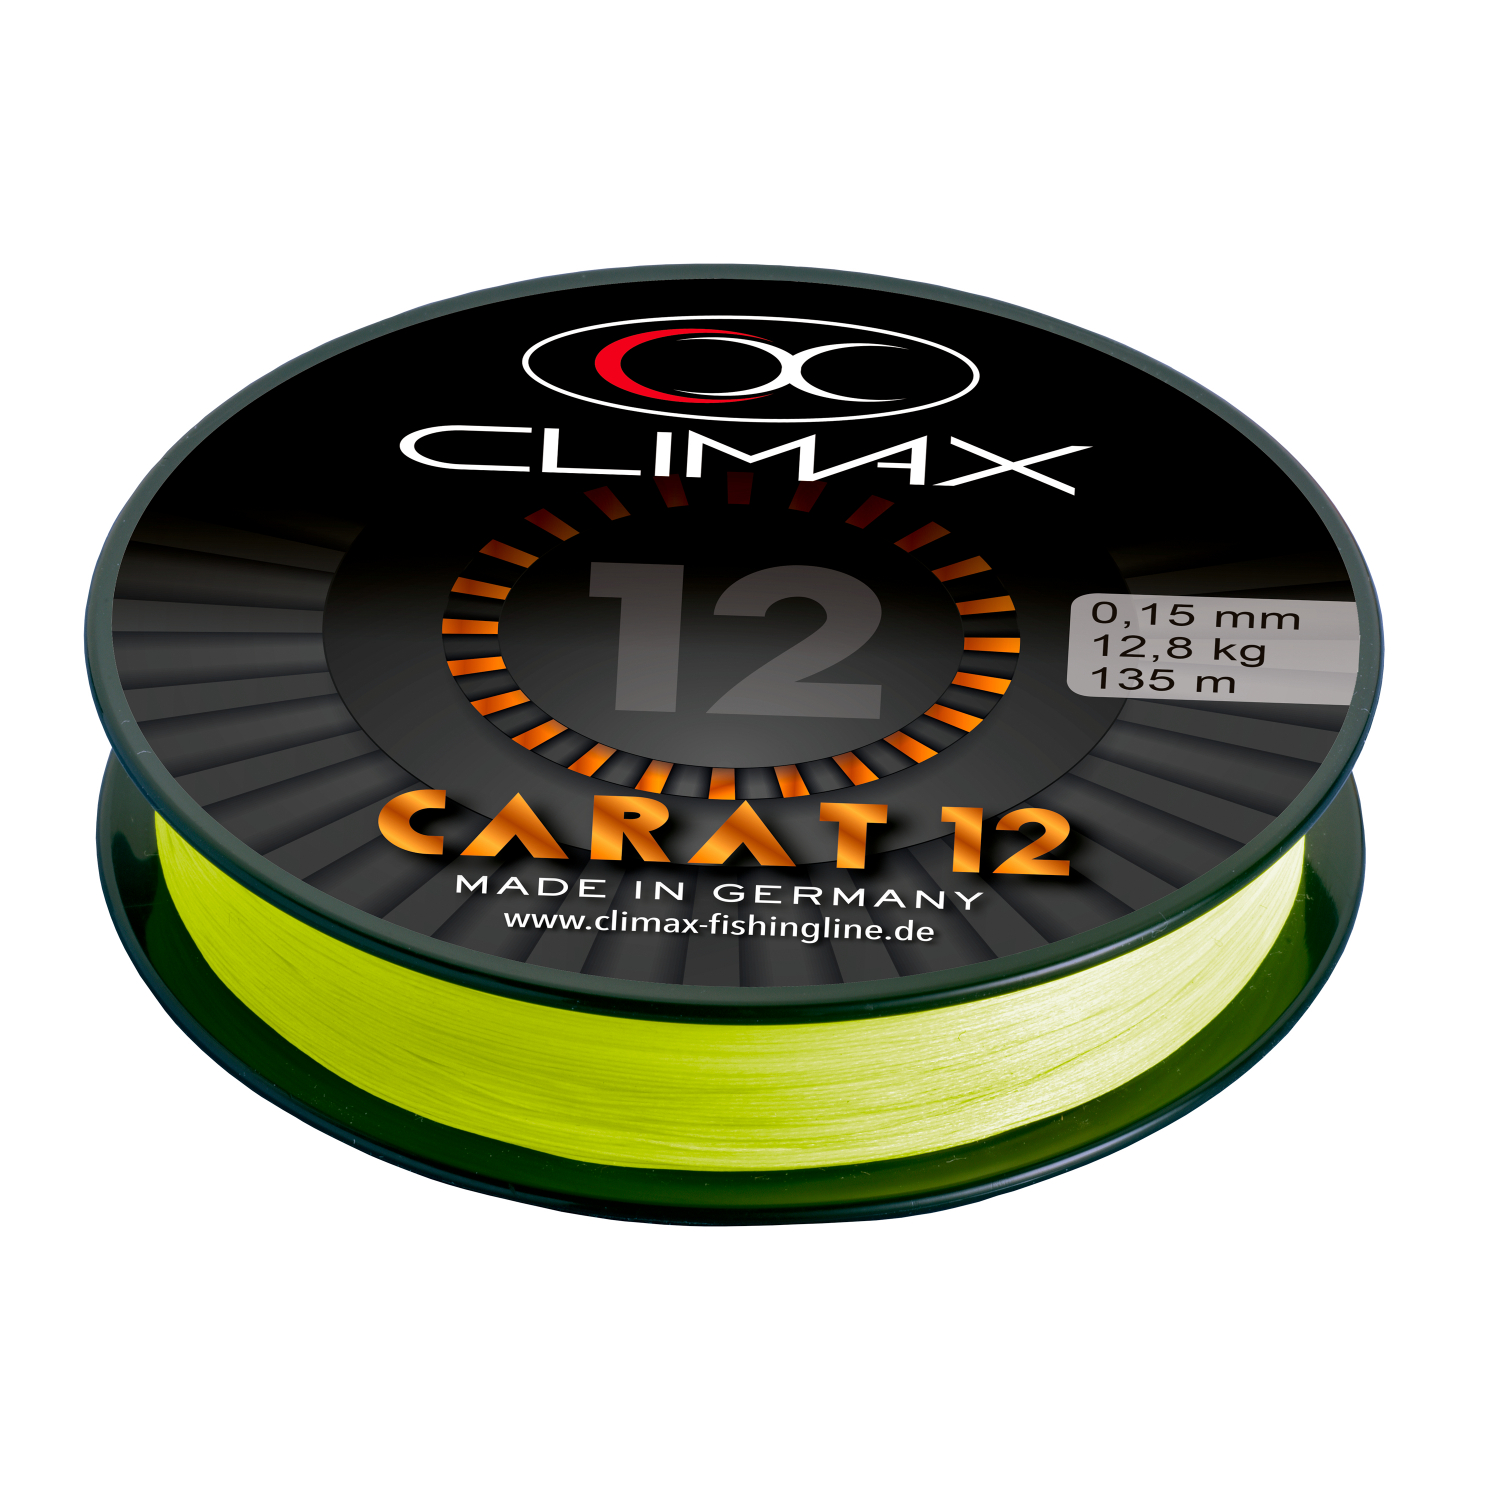 Climax Fishing Line Carat 12 (135 m) at low prices